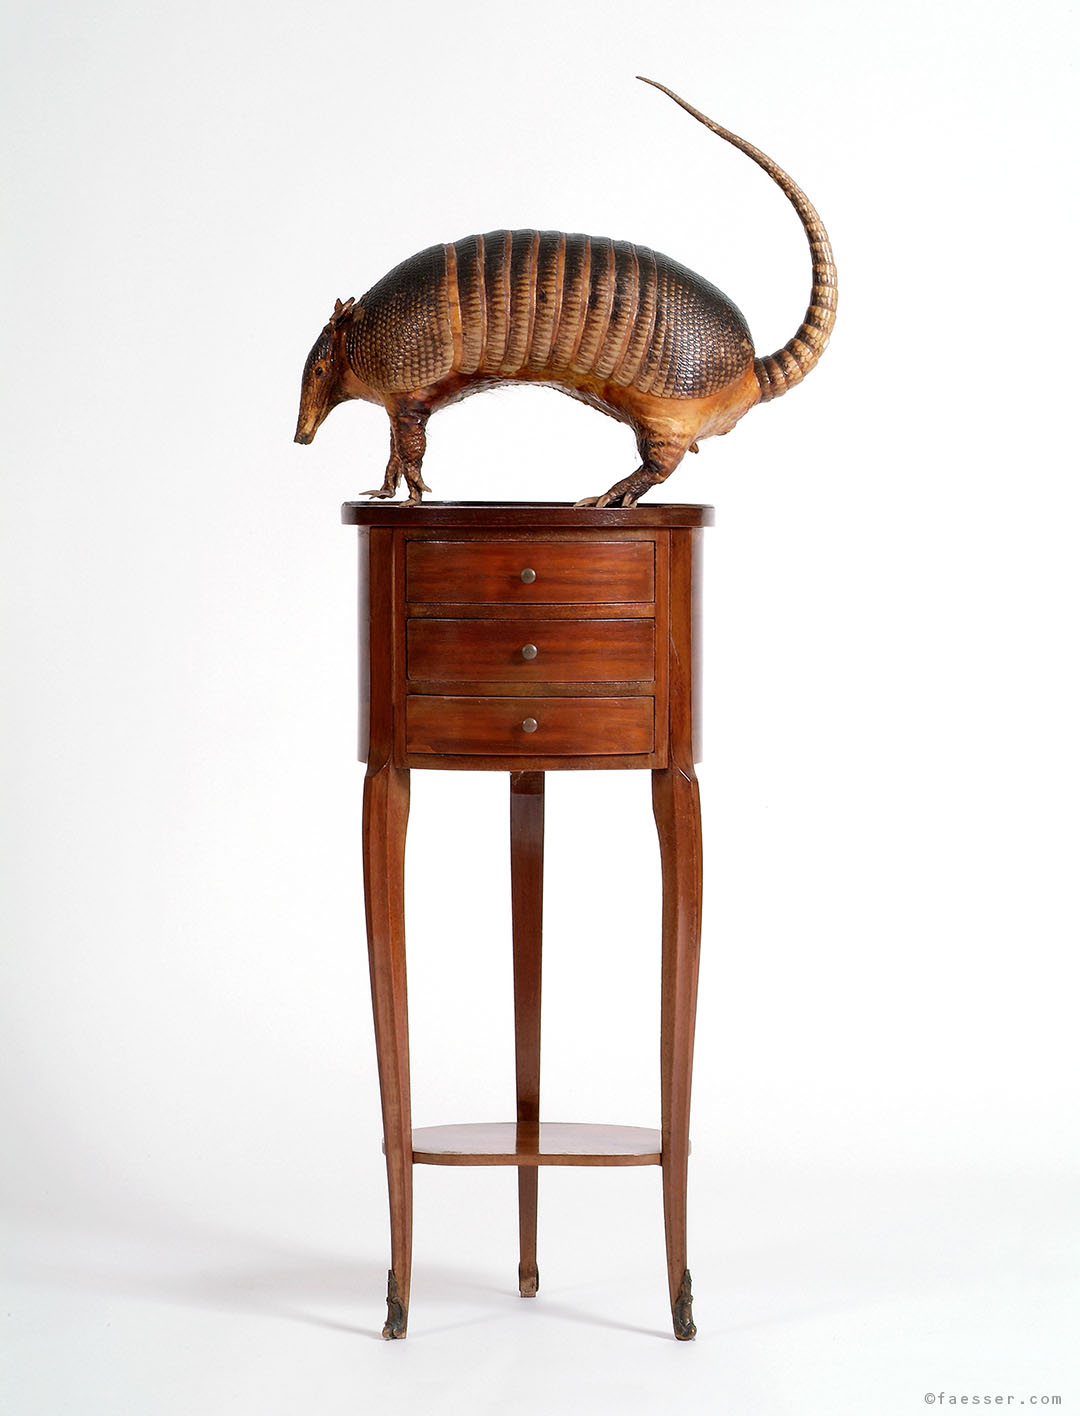 Armadillo on a small furniture chest of drawers; work of art; artist Roland Faesser, sculptor and painter 1990